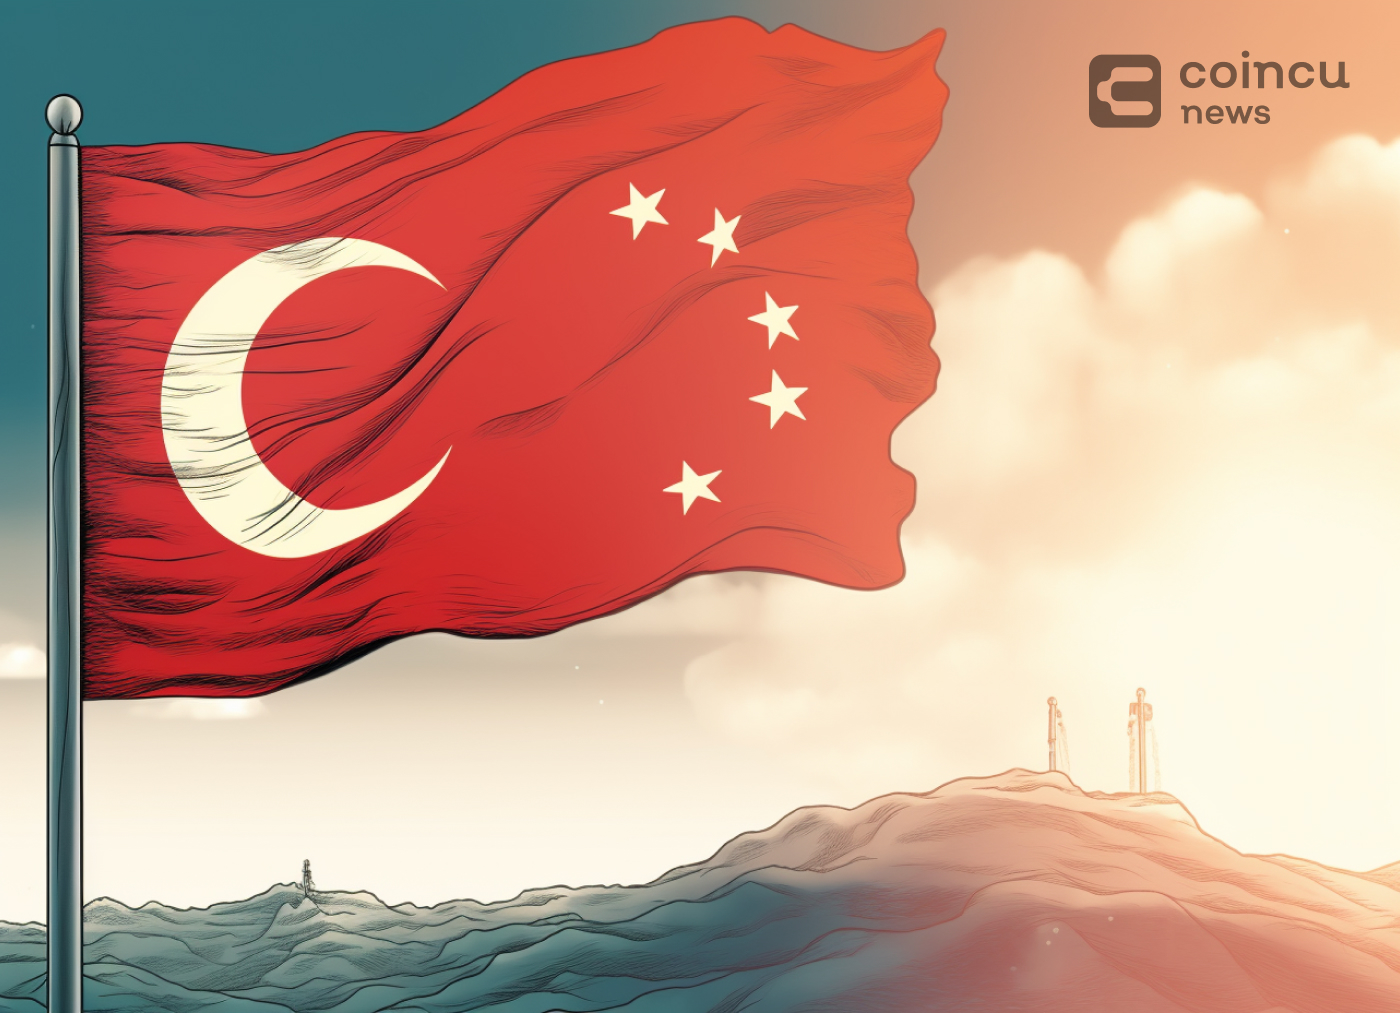 52% Of Turkish Adults Are Now Investing In Crypto: KuCoin Report